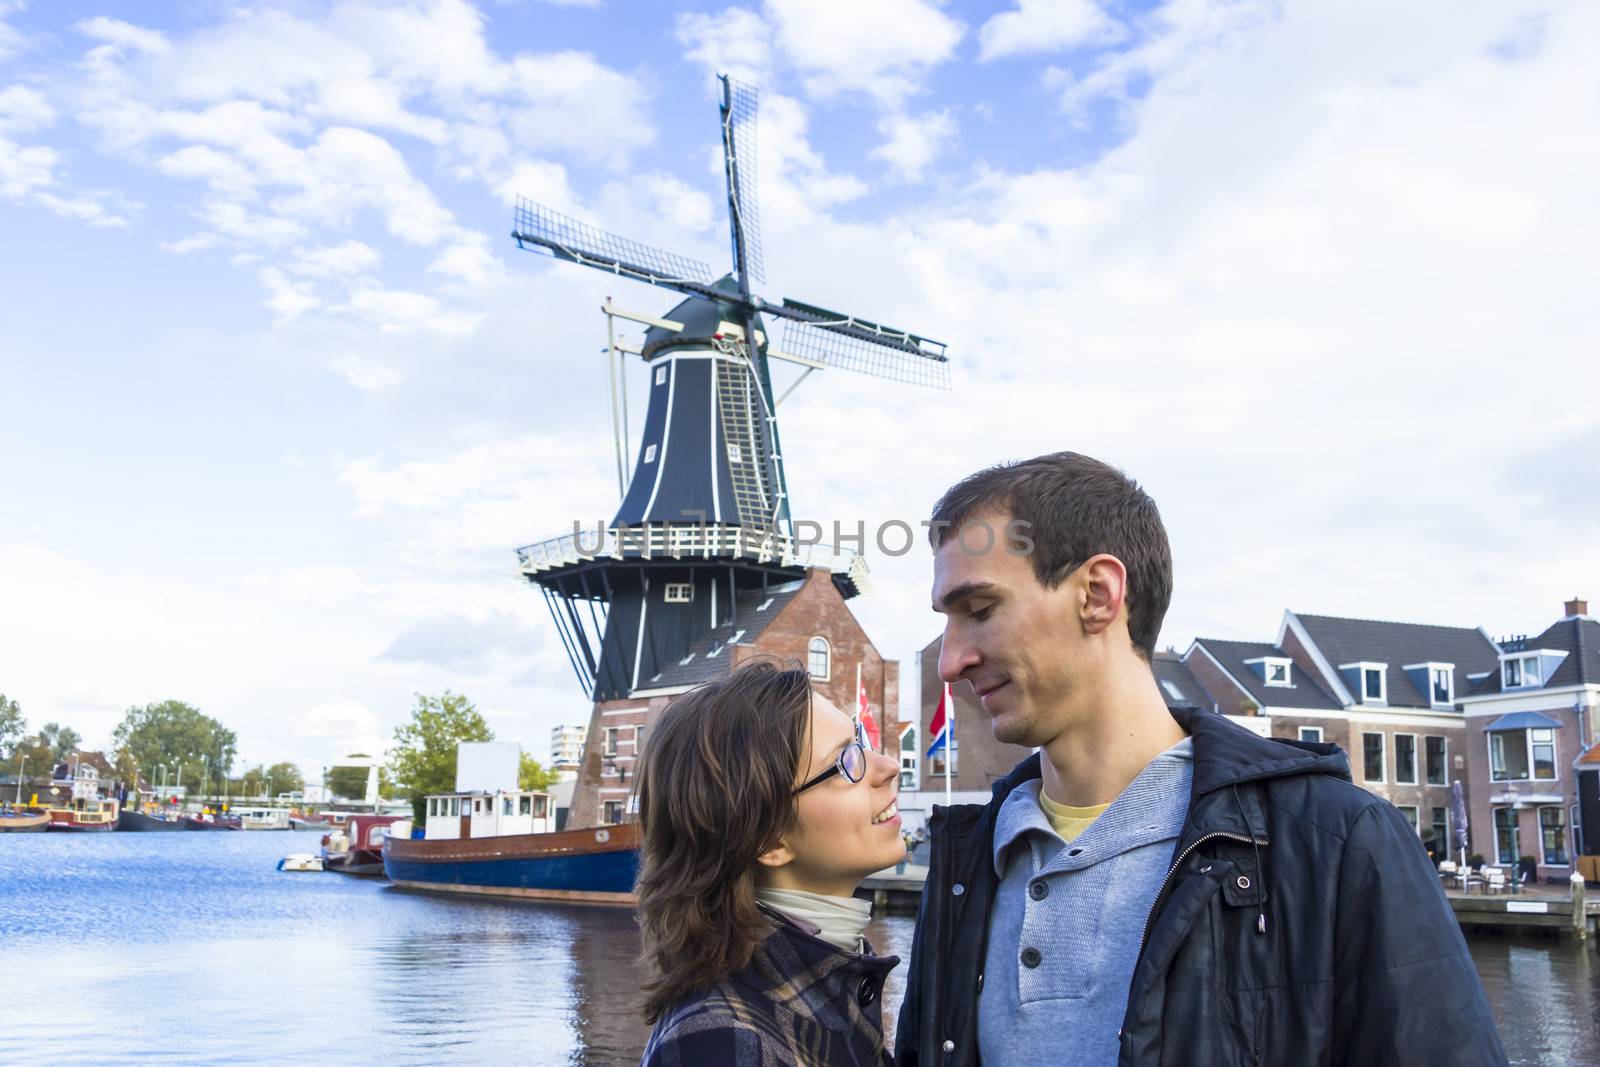 Young couple in Dutch town of Haarlem, the Netherlands by Tetyana